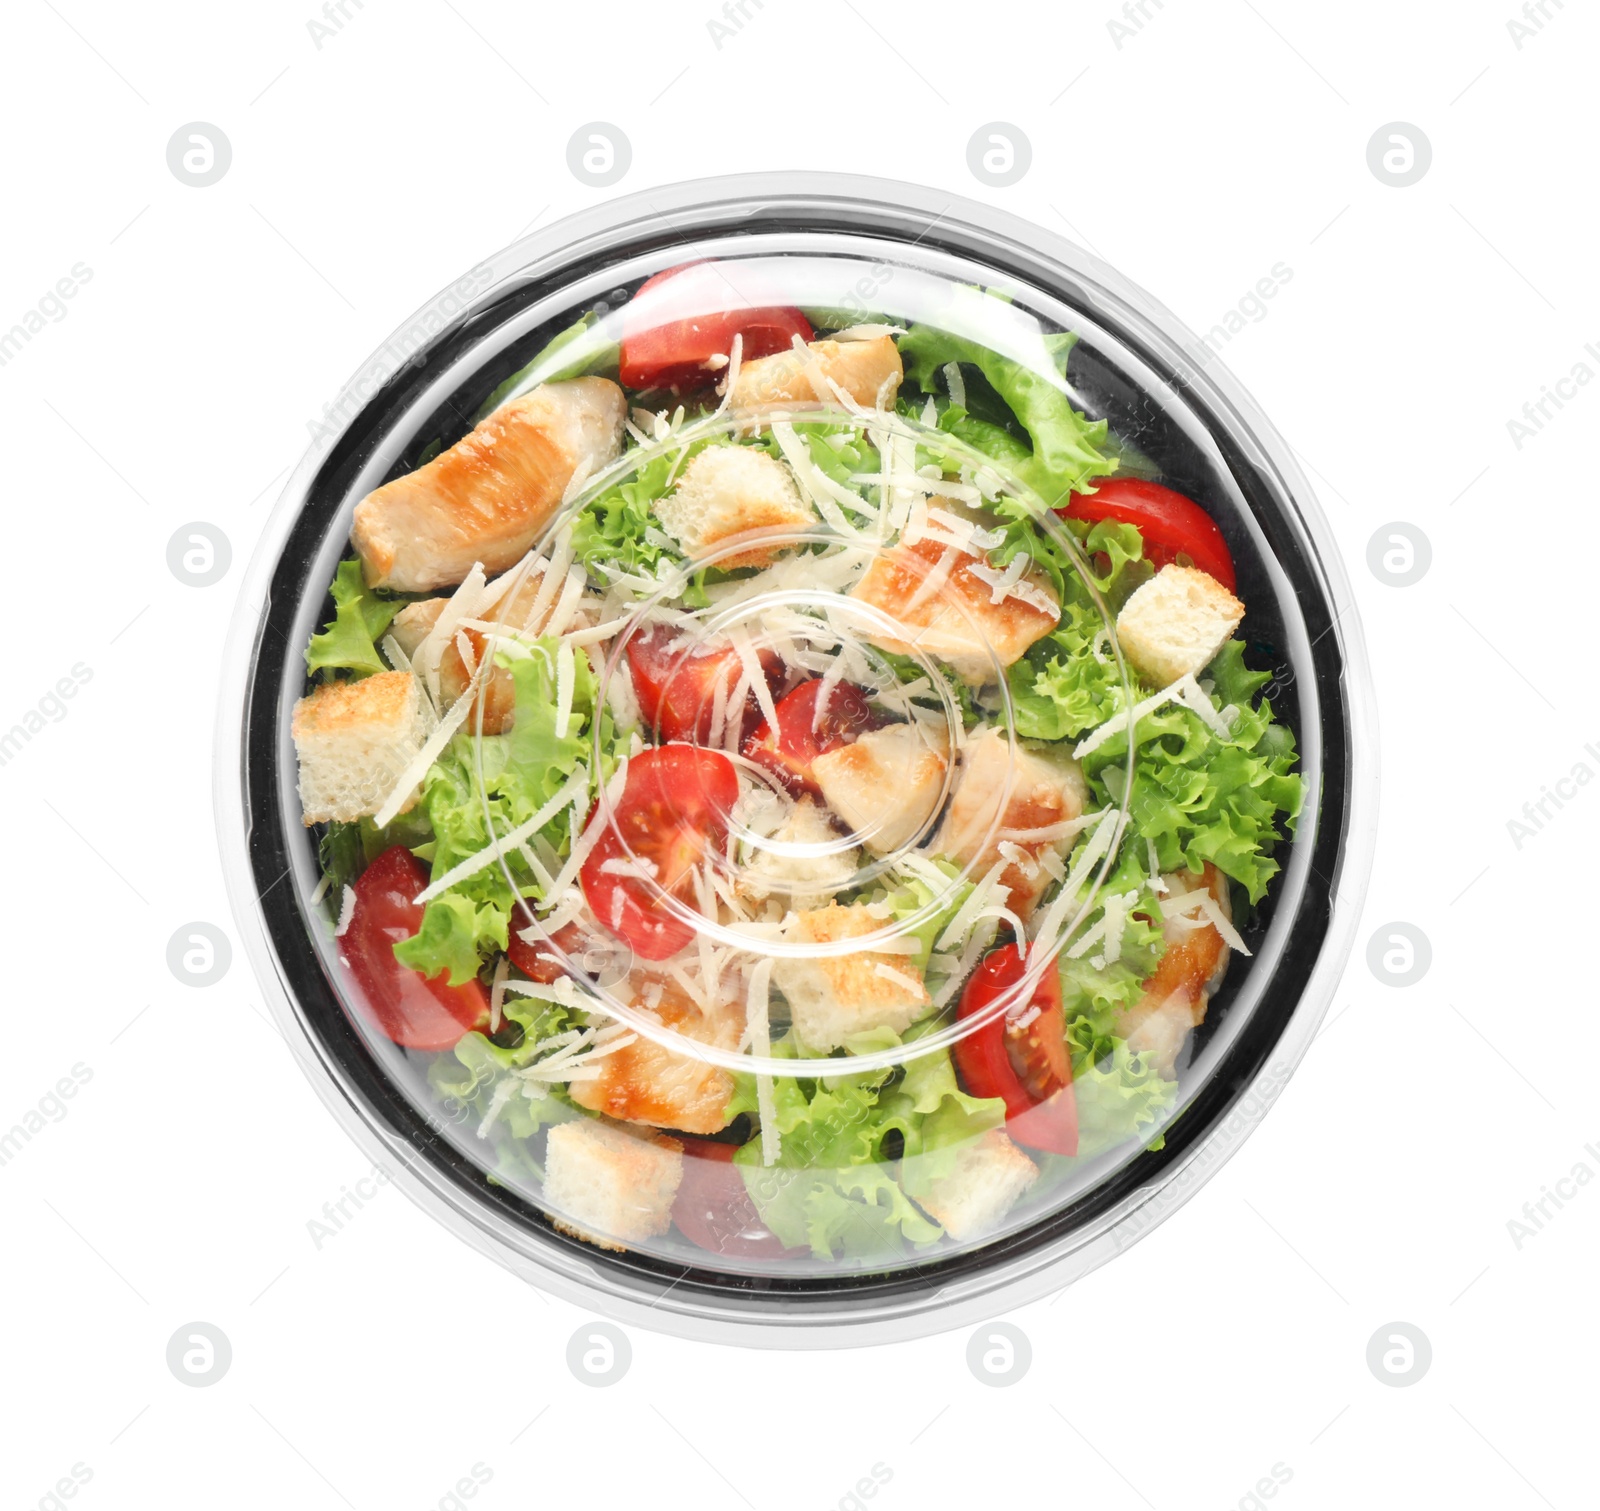 Image of Delicious fresh salad in plastic container with lid on white background, top view